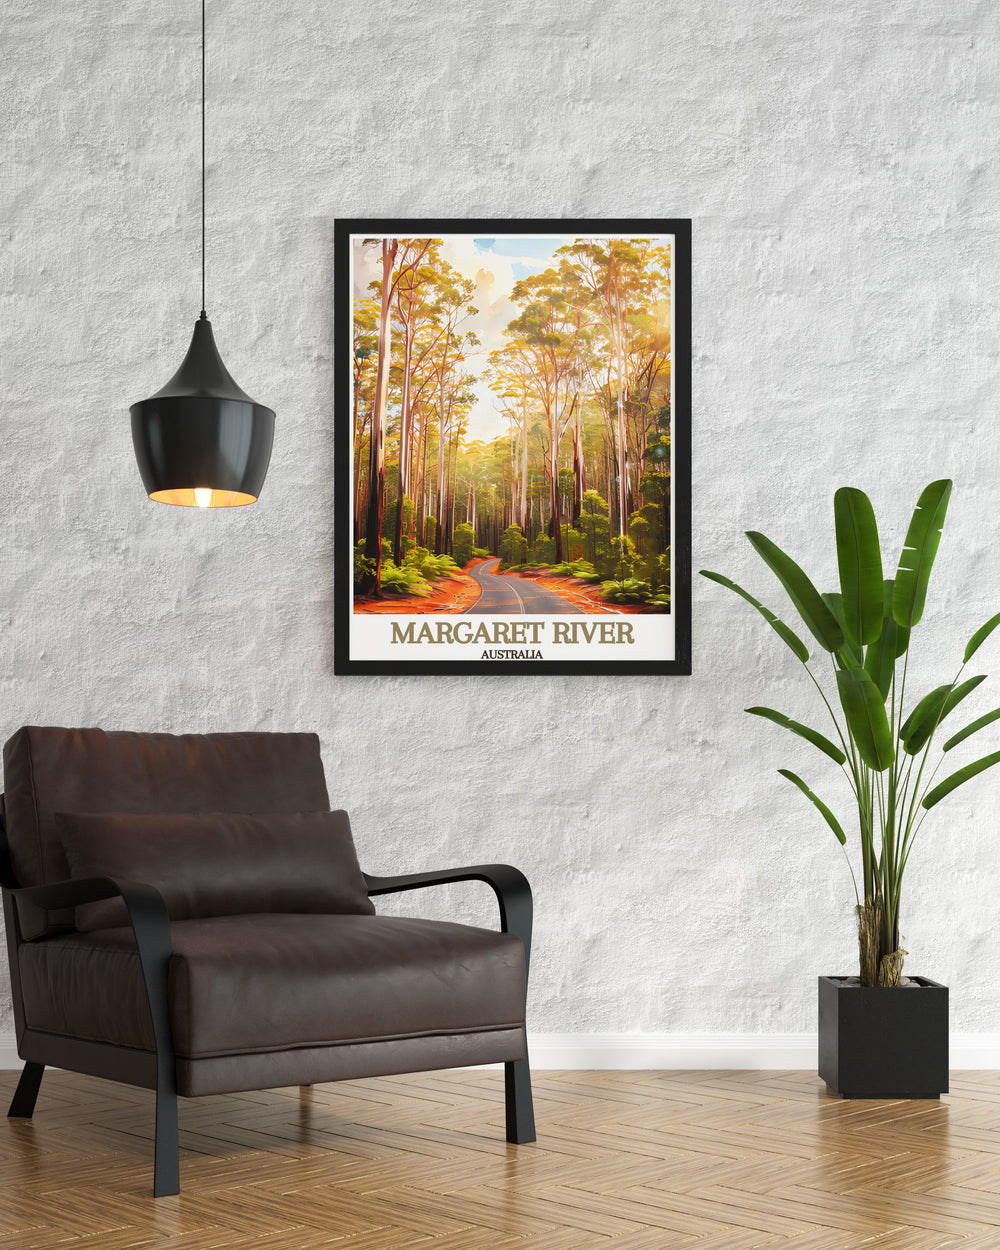 Transform your living space with Australia Travel Art showcasing the serene beauty of Margaret River and Boranup Karri Forest ideal for nature lovers